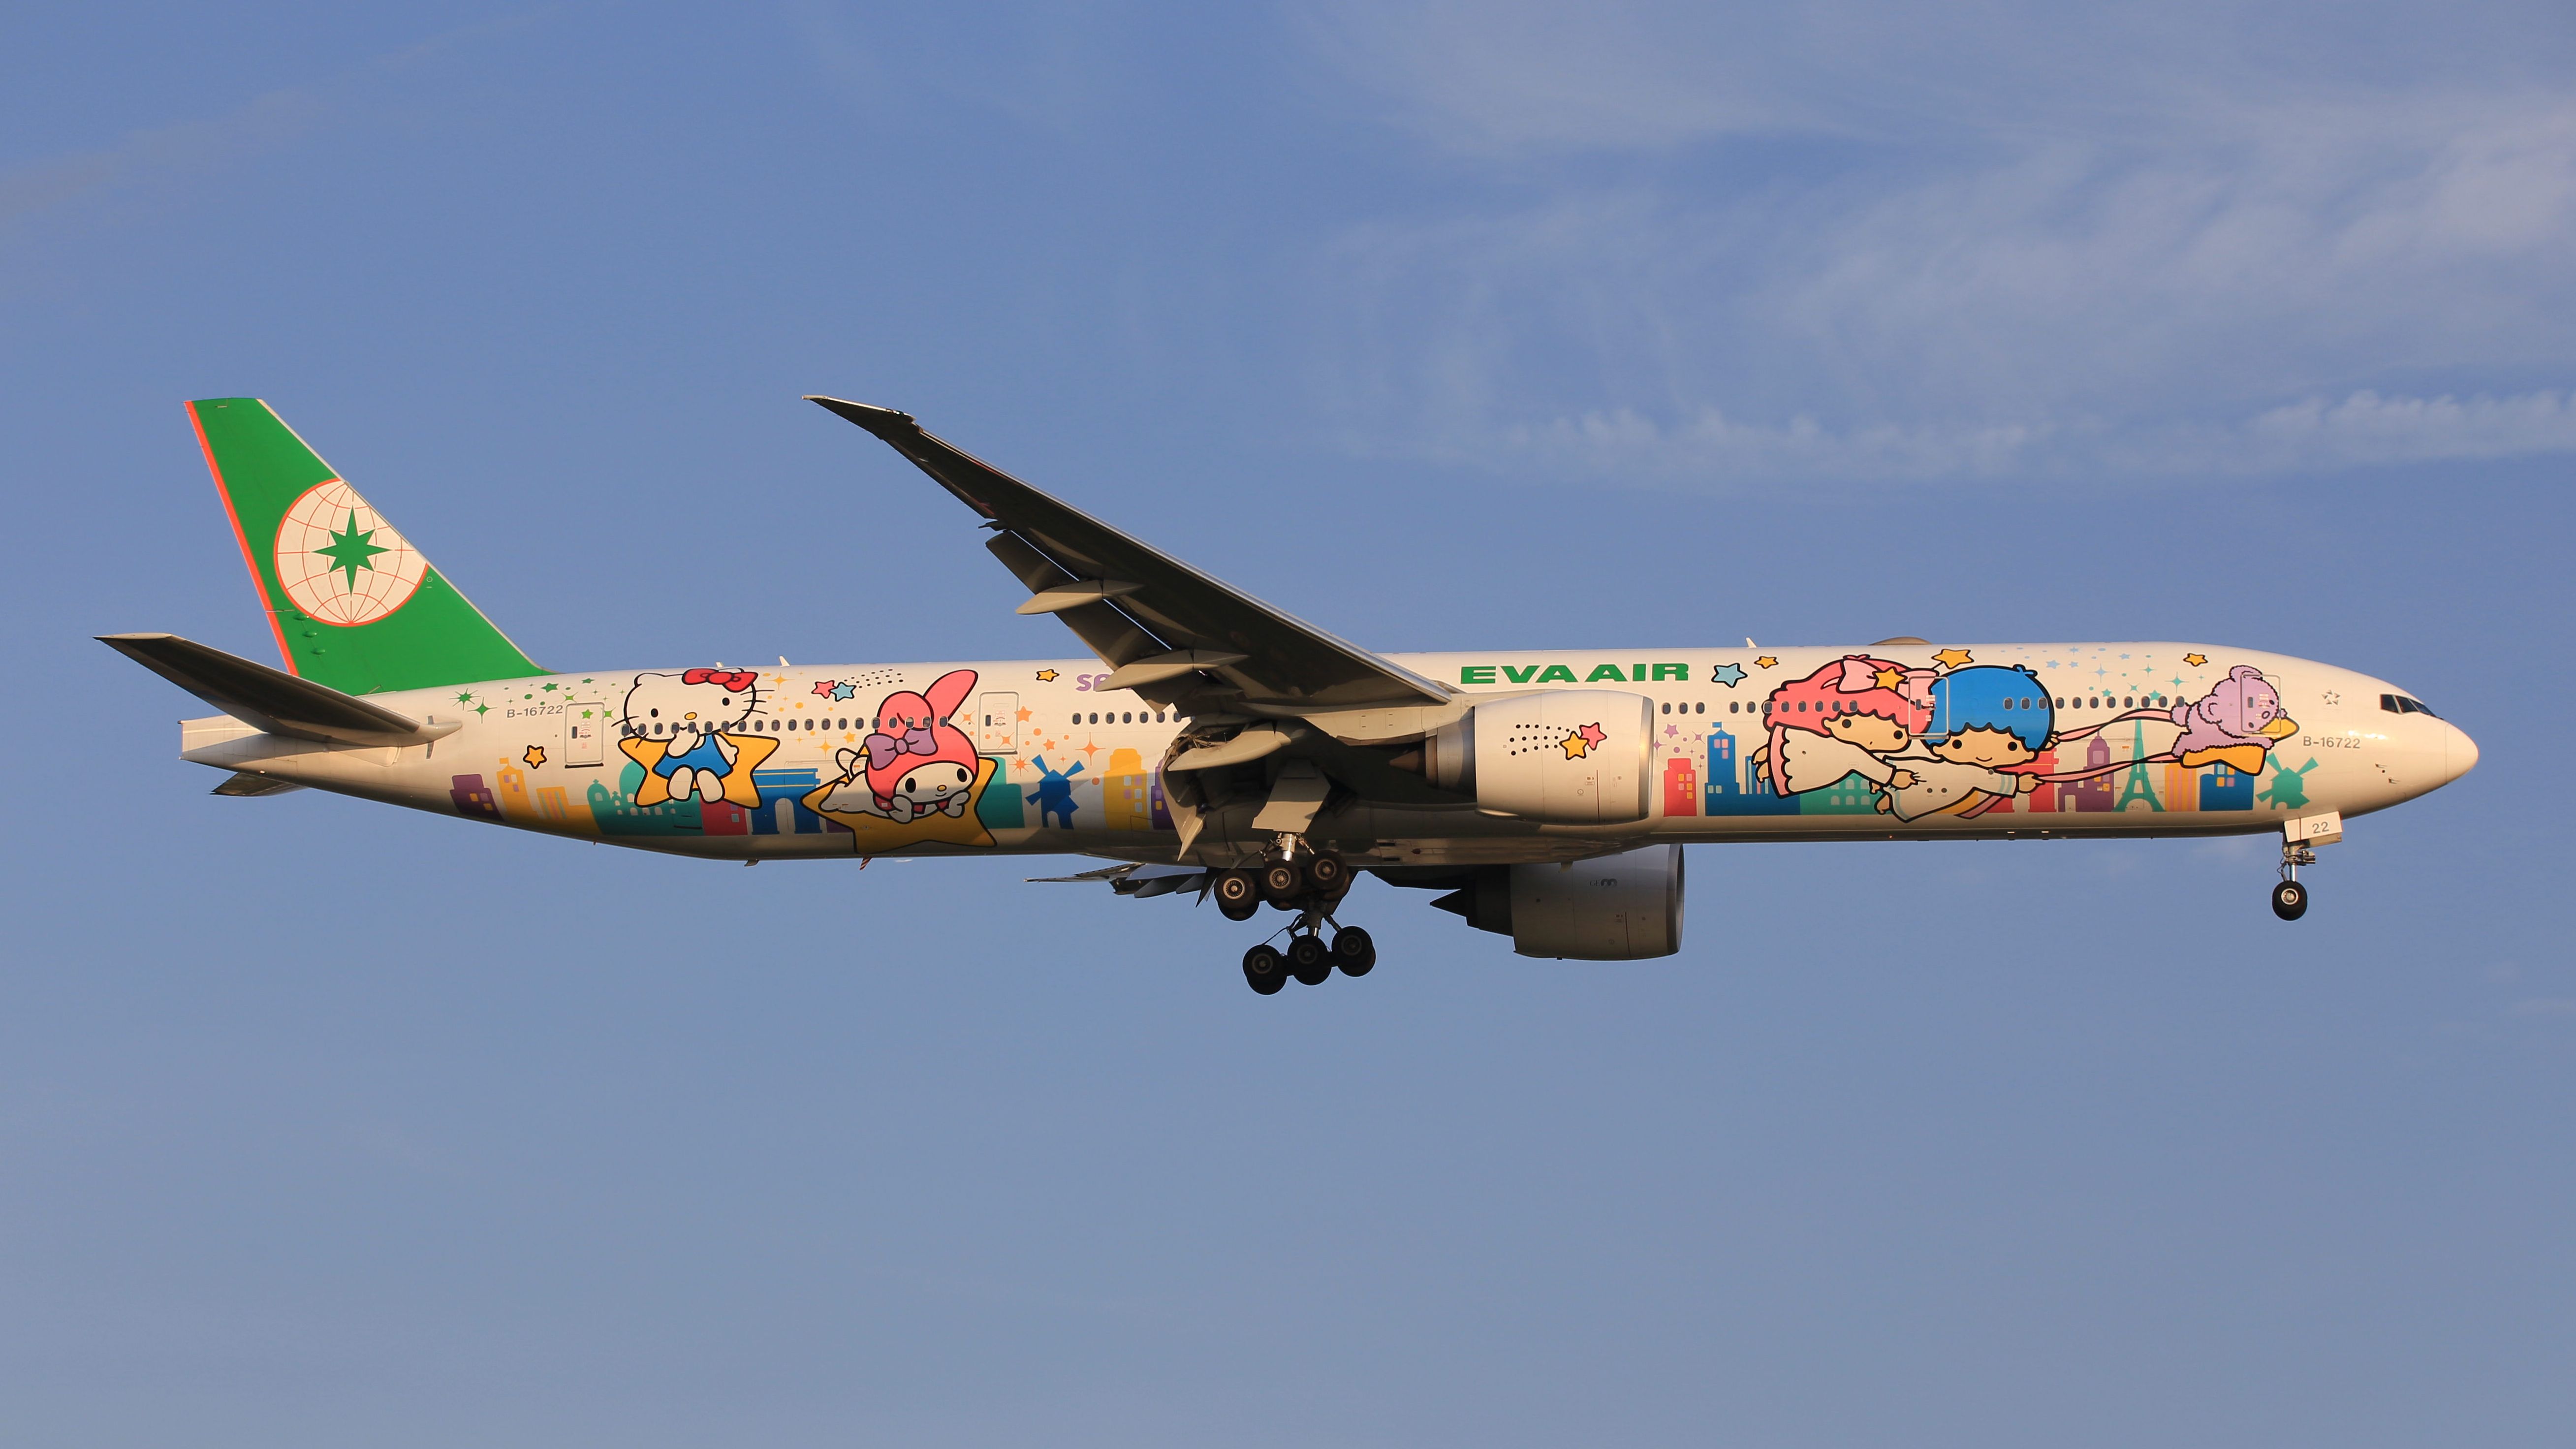 An EVA Air Boeing 777-300ER with a Hello Kitty Sanrio livery flying in the sky.